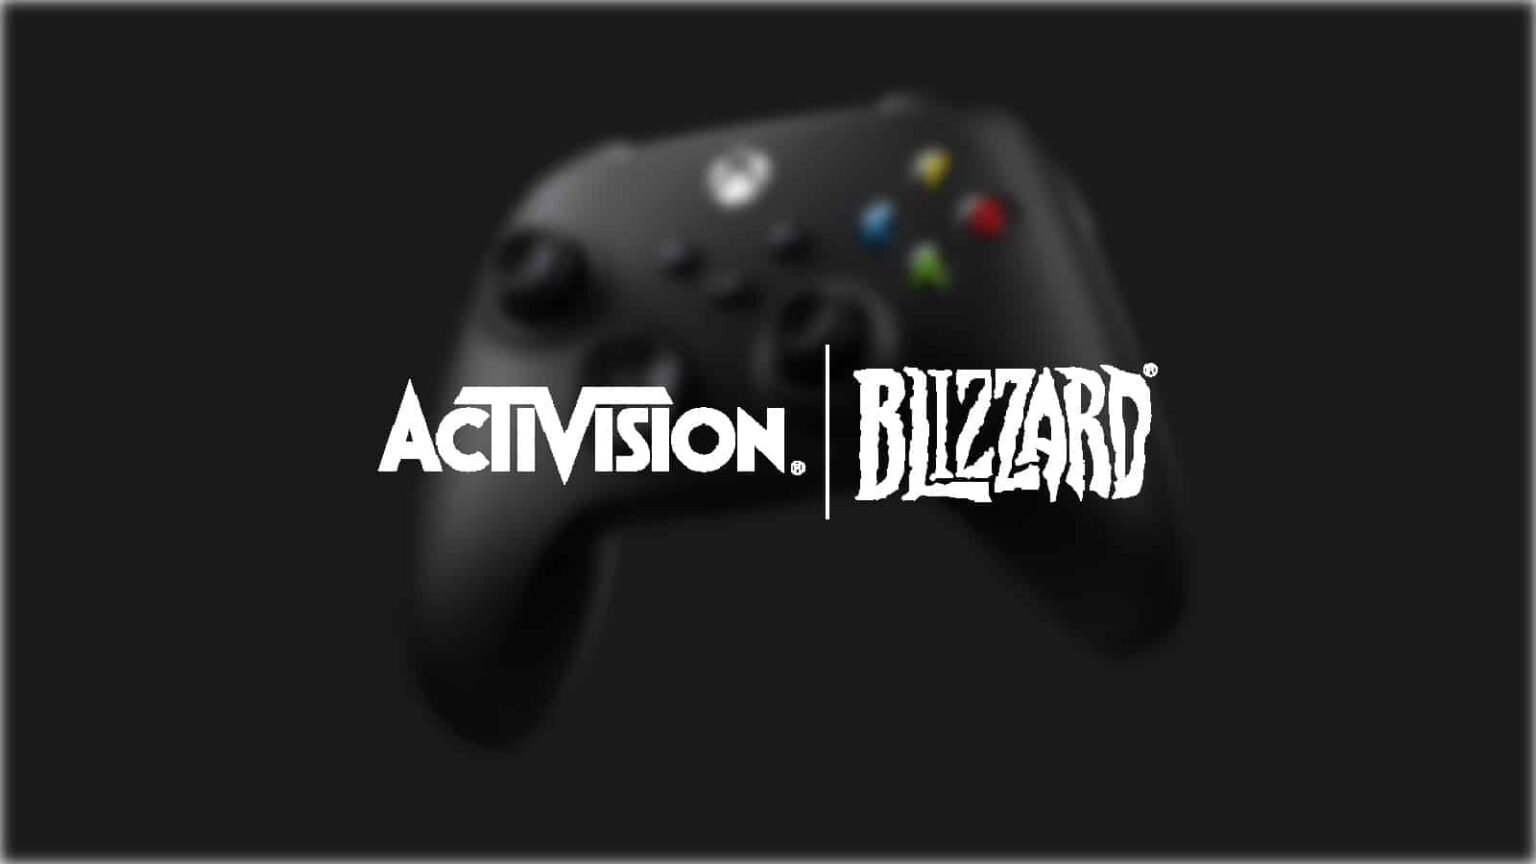 Microsoft claims victory in FTC lawsuit over Activision deal